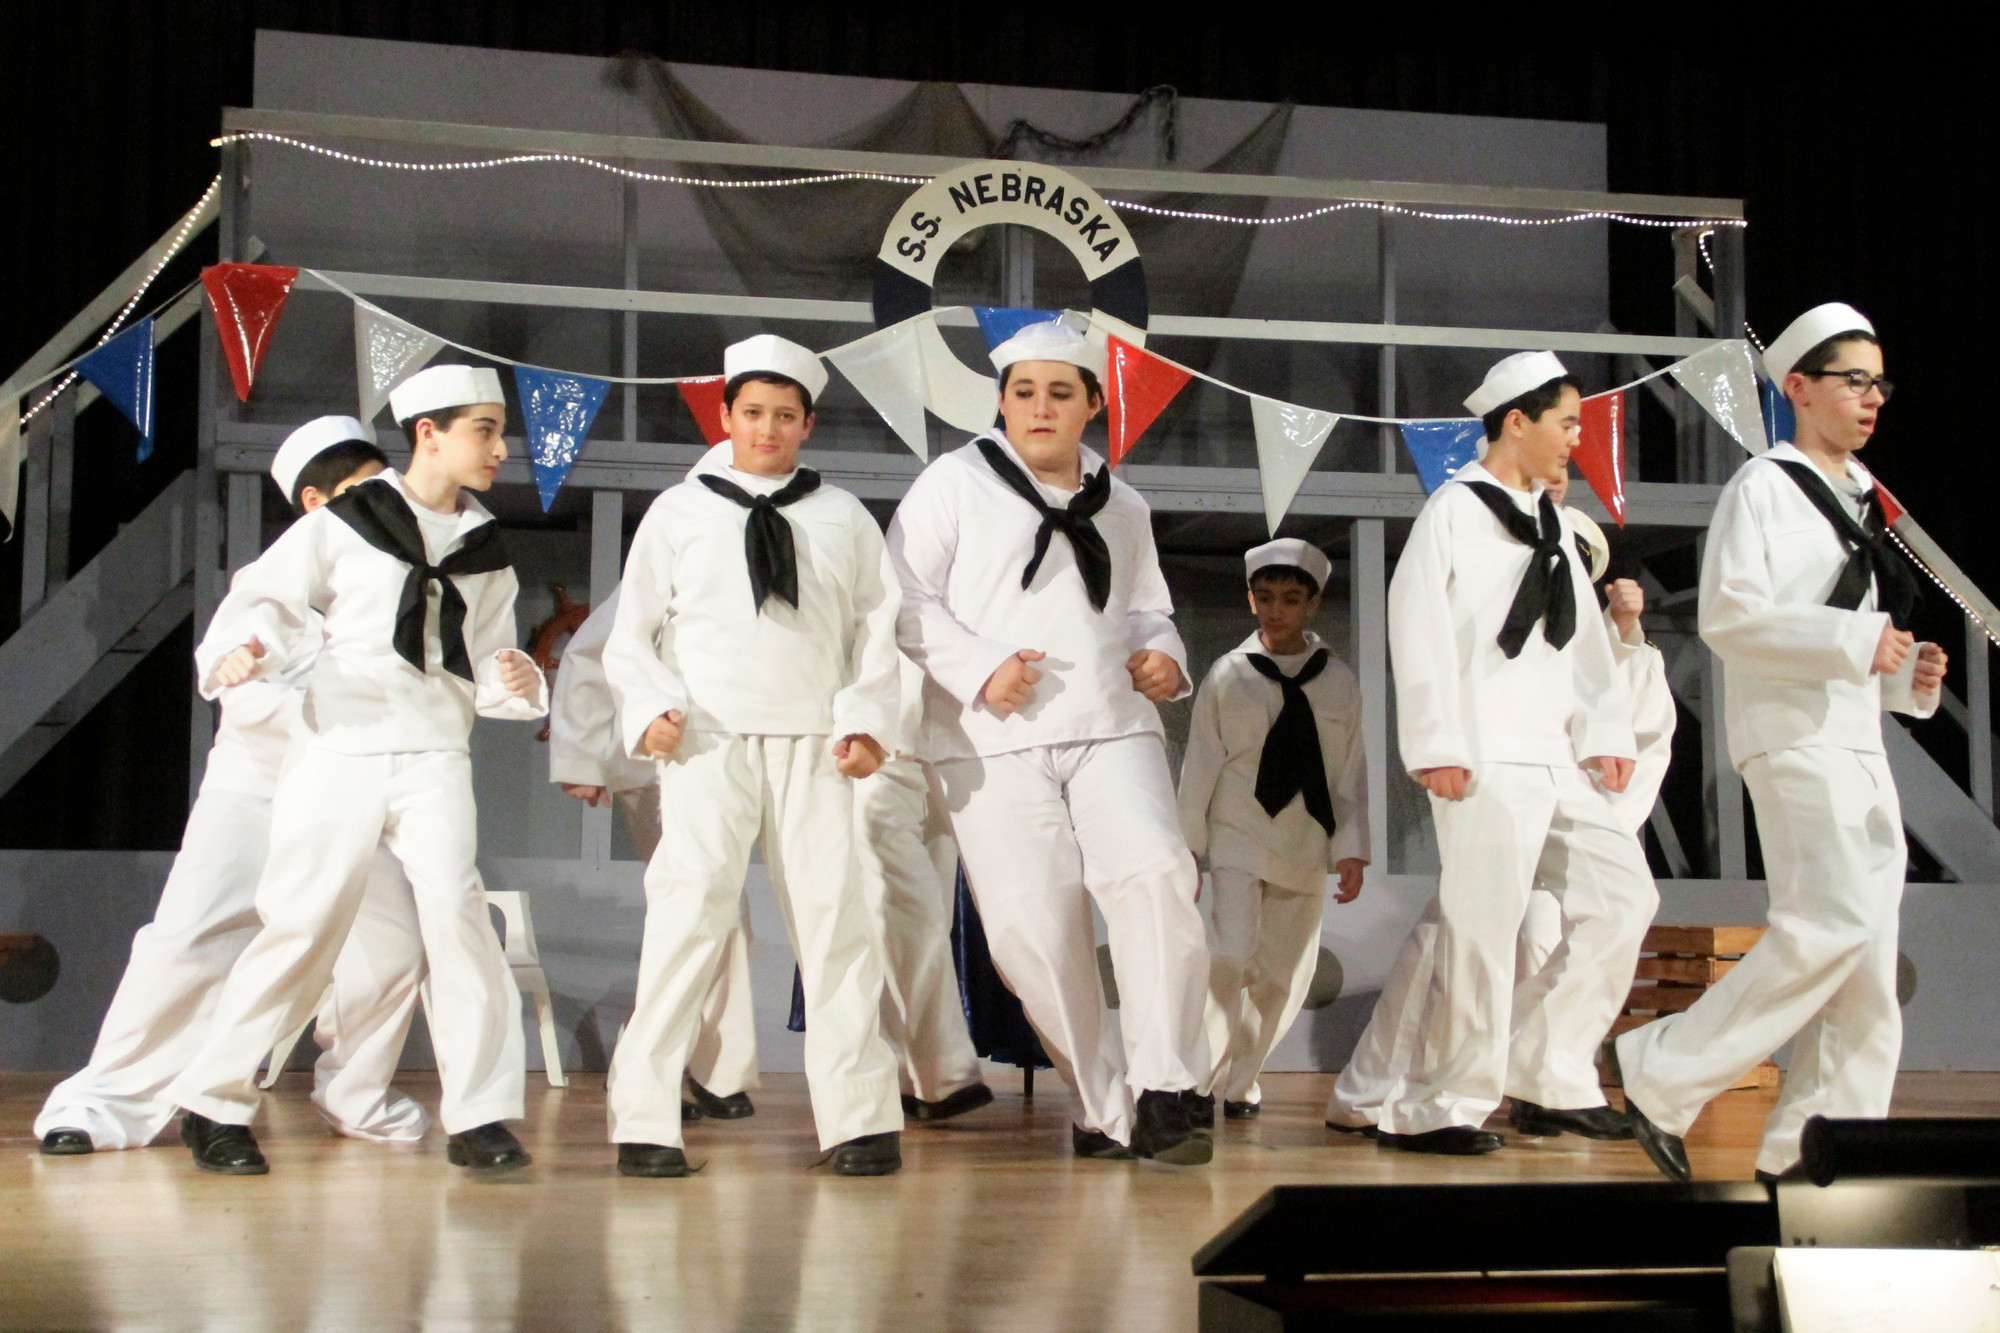 The sailors show off their steps for the dance number.